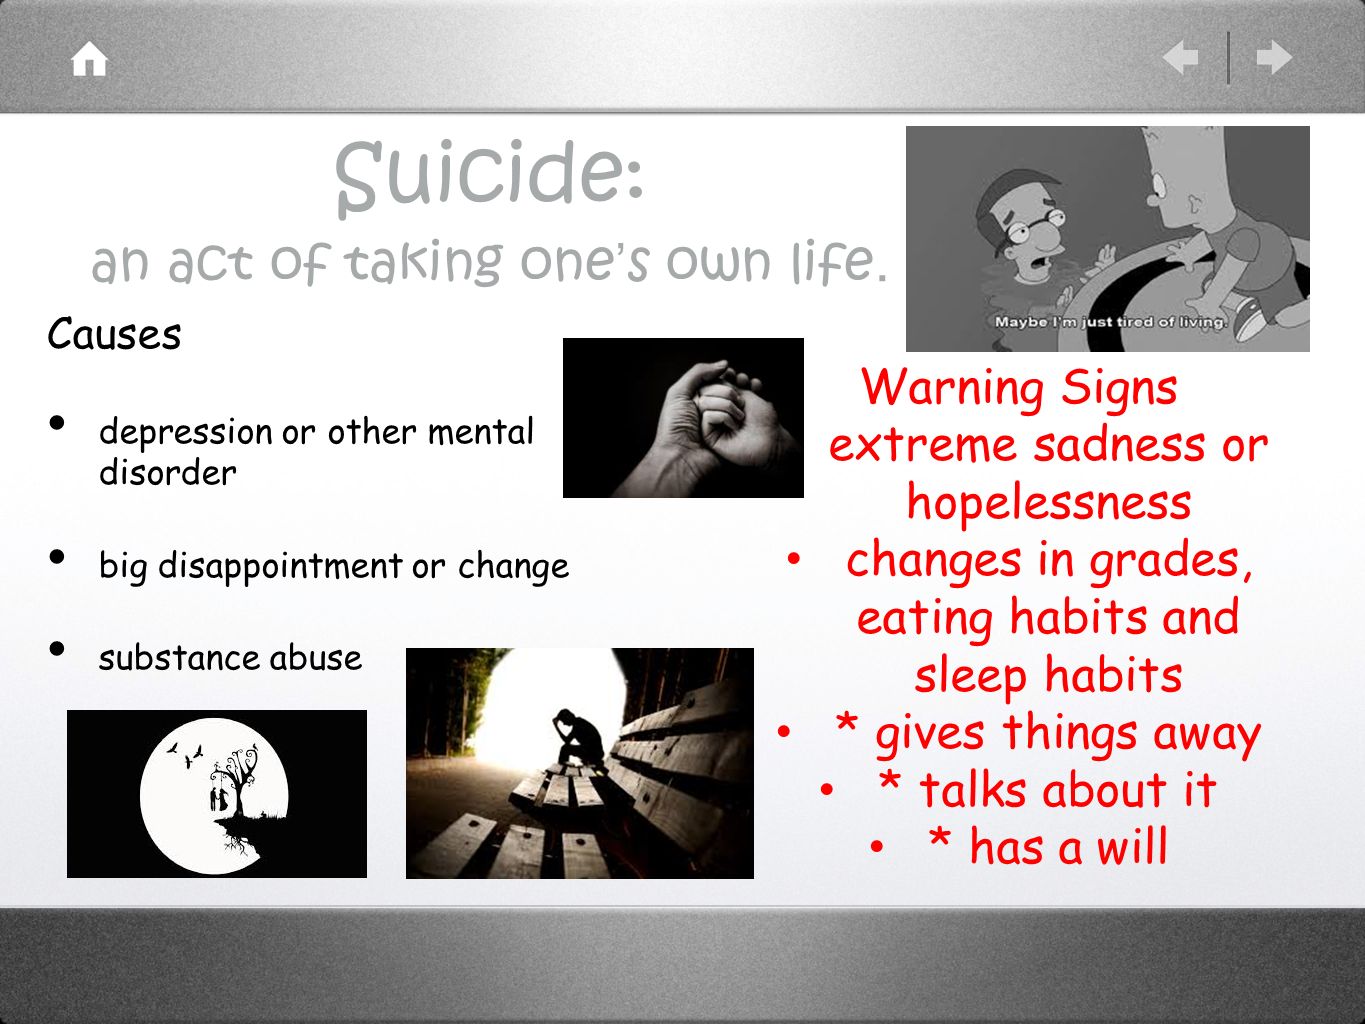 Suicide: an act of taking one’s own life.